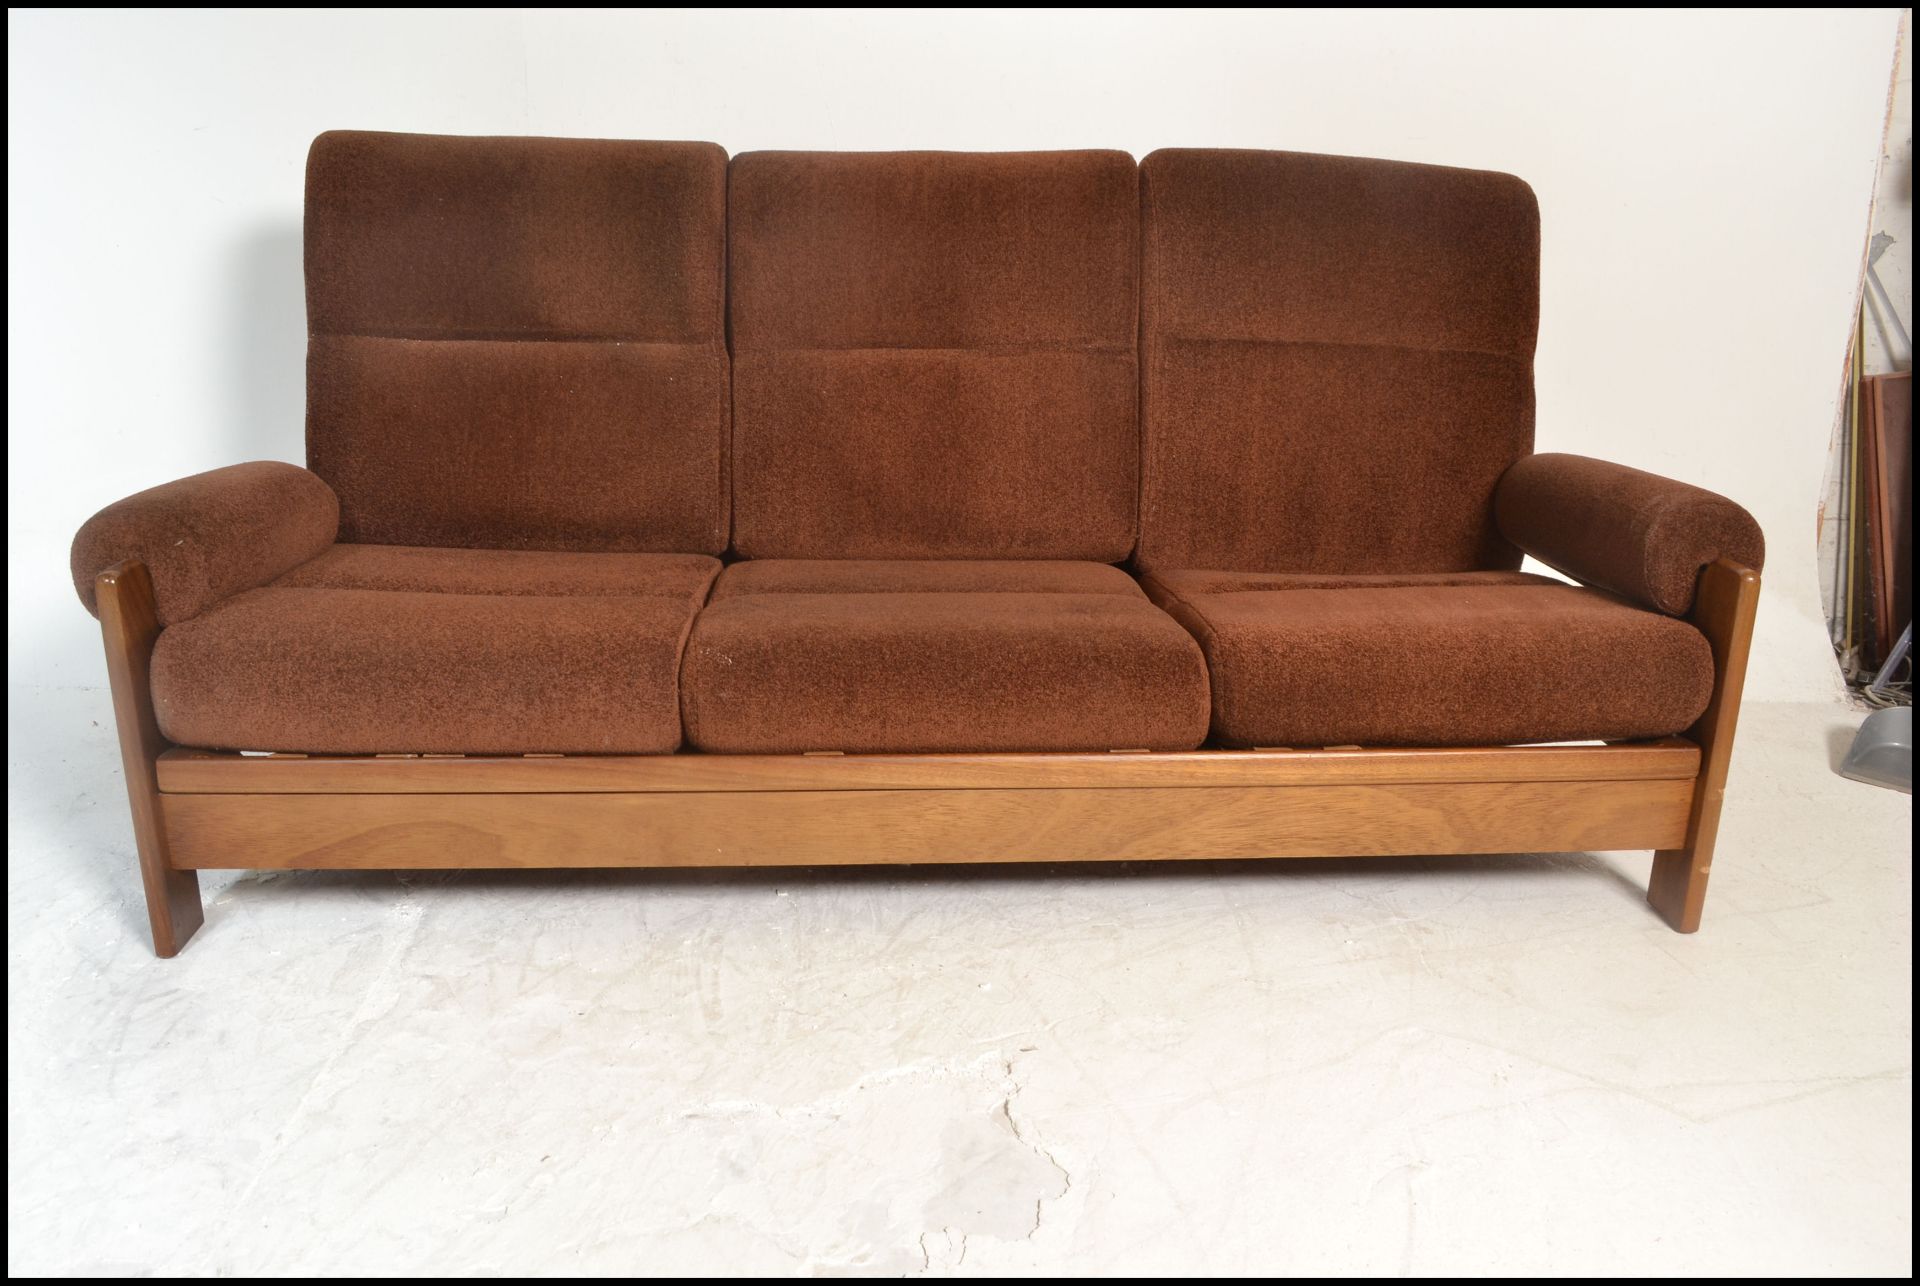 A retro 1960's Danish inspired teak wood day bed sofa. The turned legs supporting a fold down bed - Bild 3 aus 7